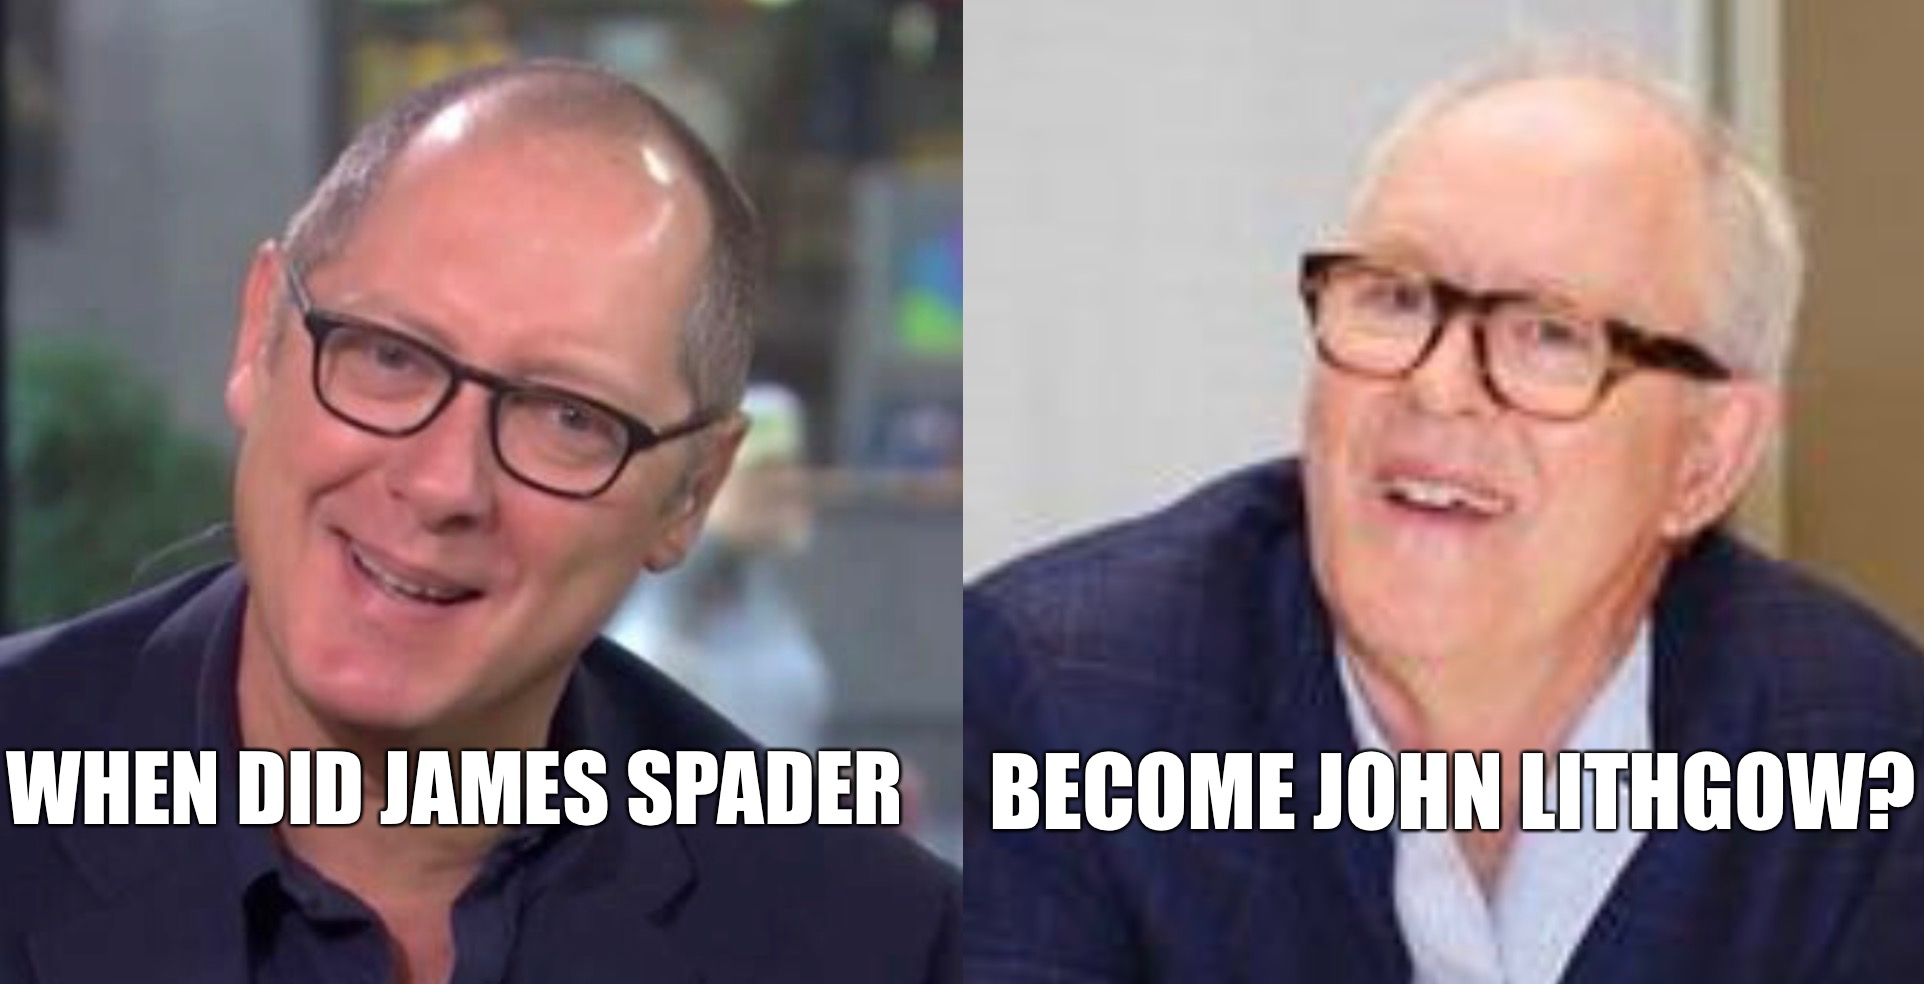 When did James spader become John Lithgow? | BECOME JOHN LITHGOW? WHEN DID JAMES SPADER | image tagged in james spader,john lithgow,lookalike,funny | made w/ Imgflip meme maker